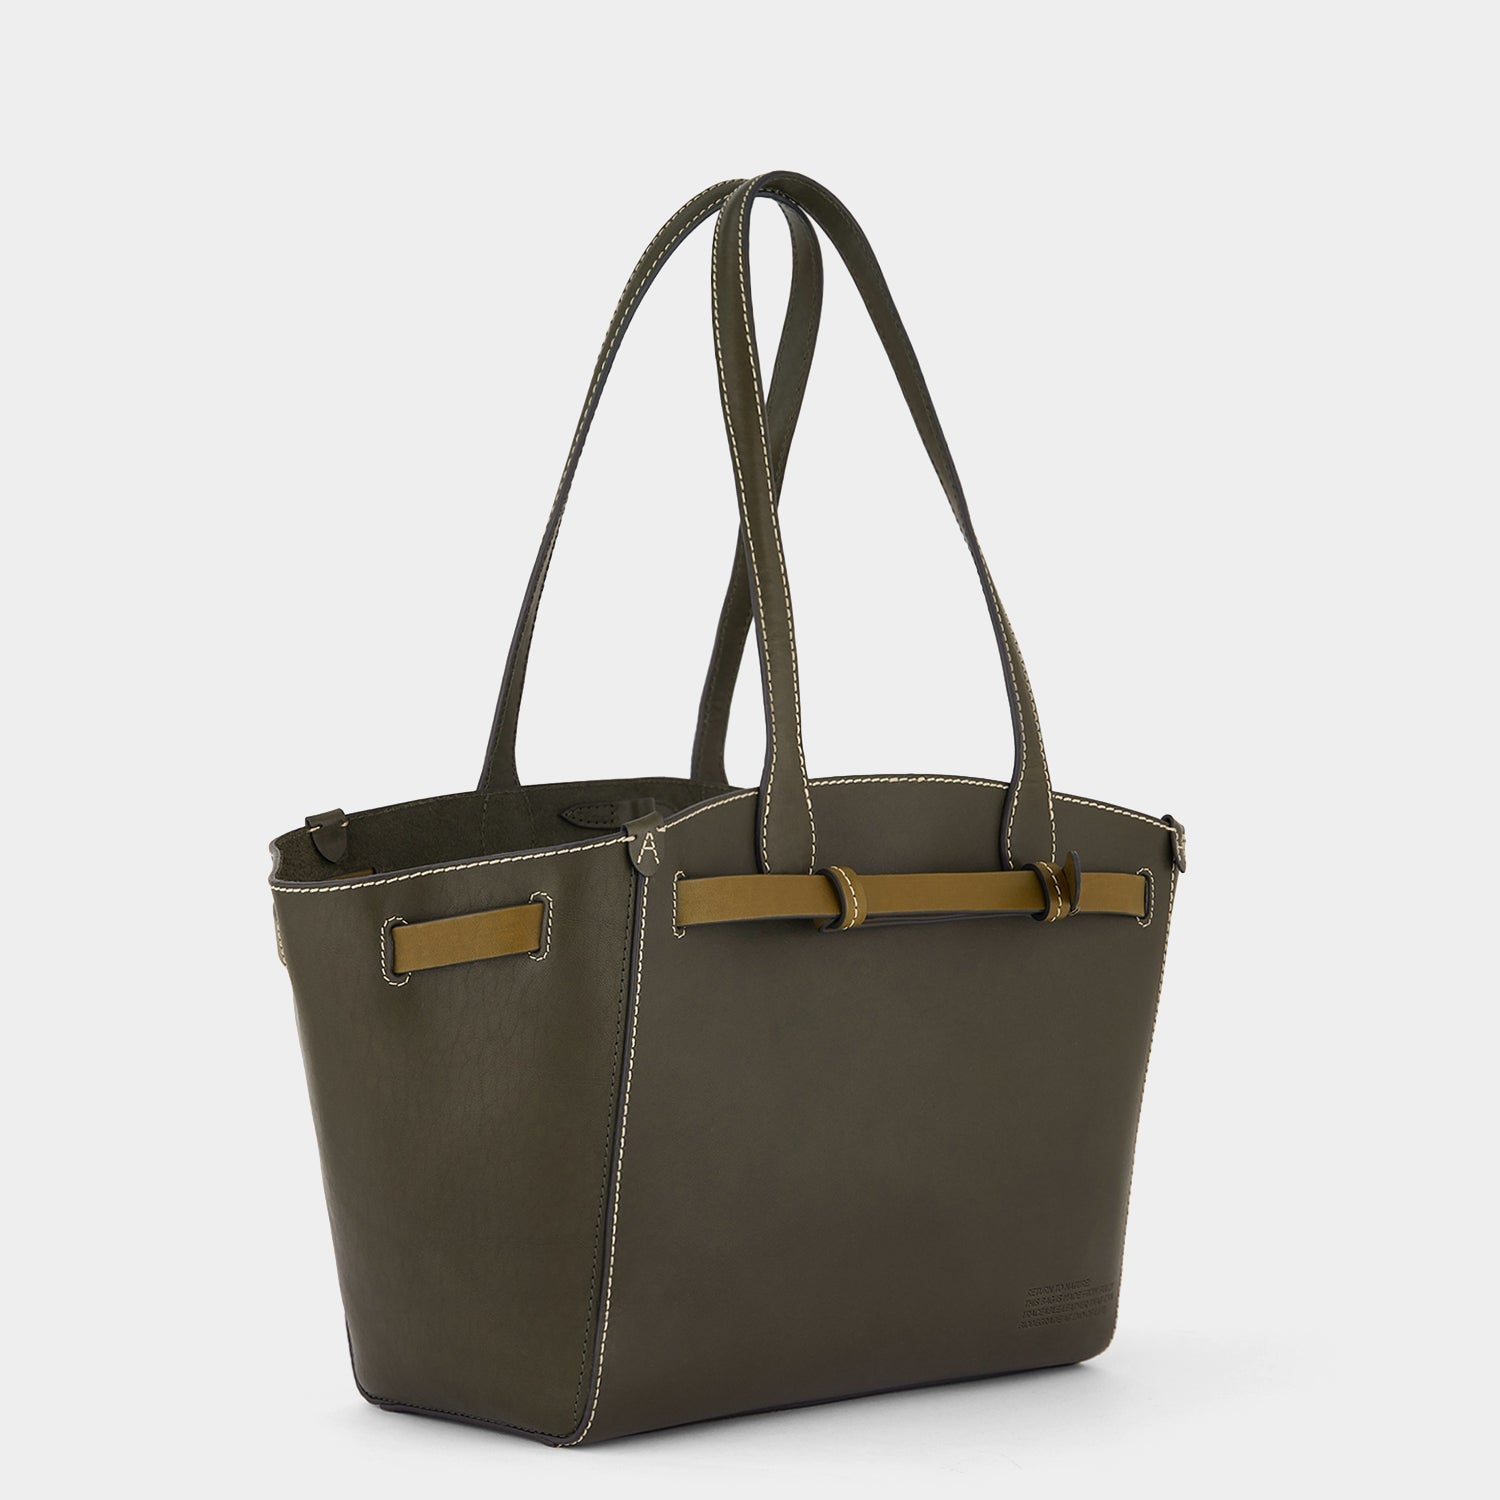 Return to Nature Tote Small -

                  
                    Compostable Leather in Dark Olive -
                  

                  Anya Hindmarch US
